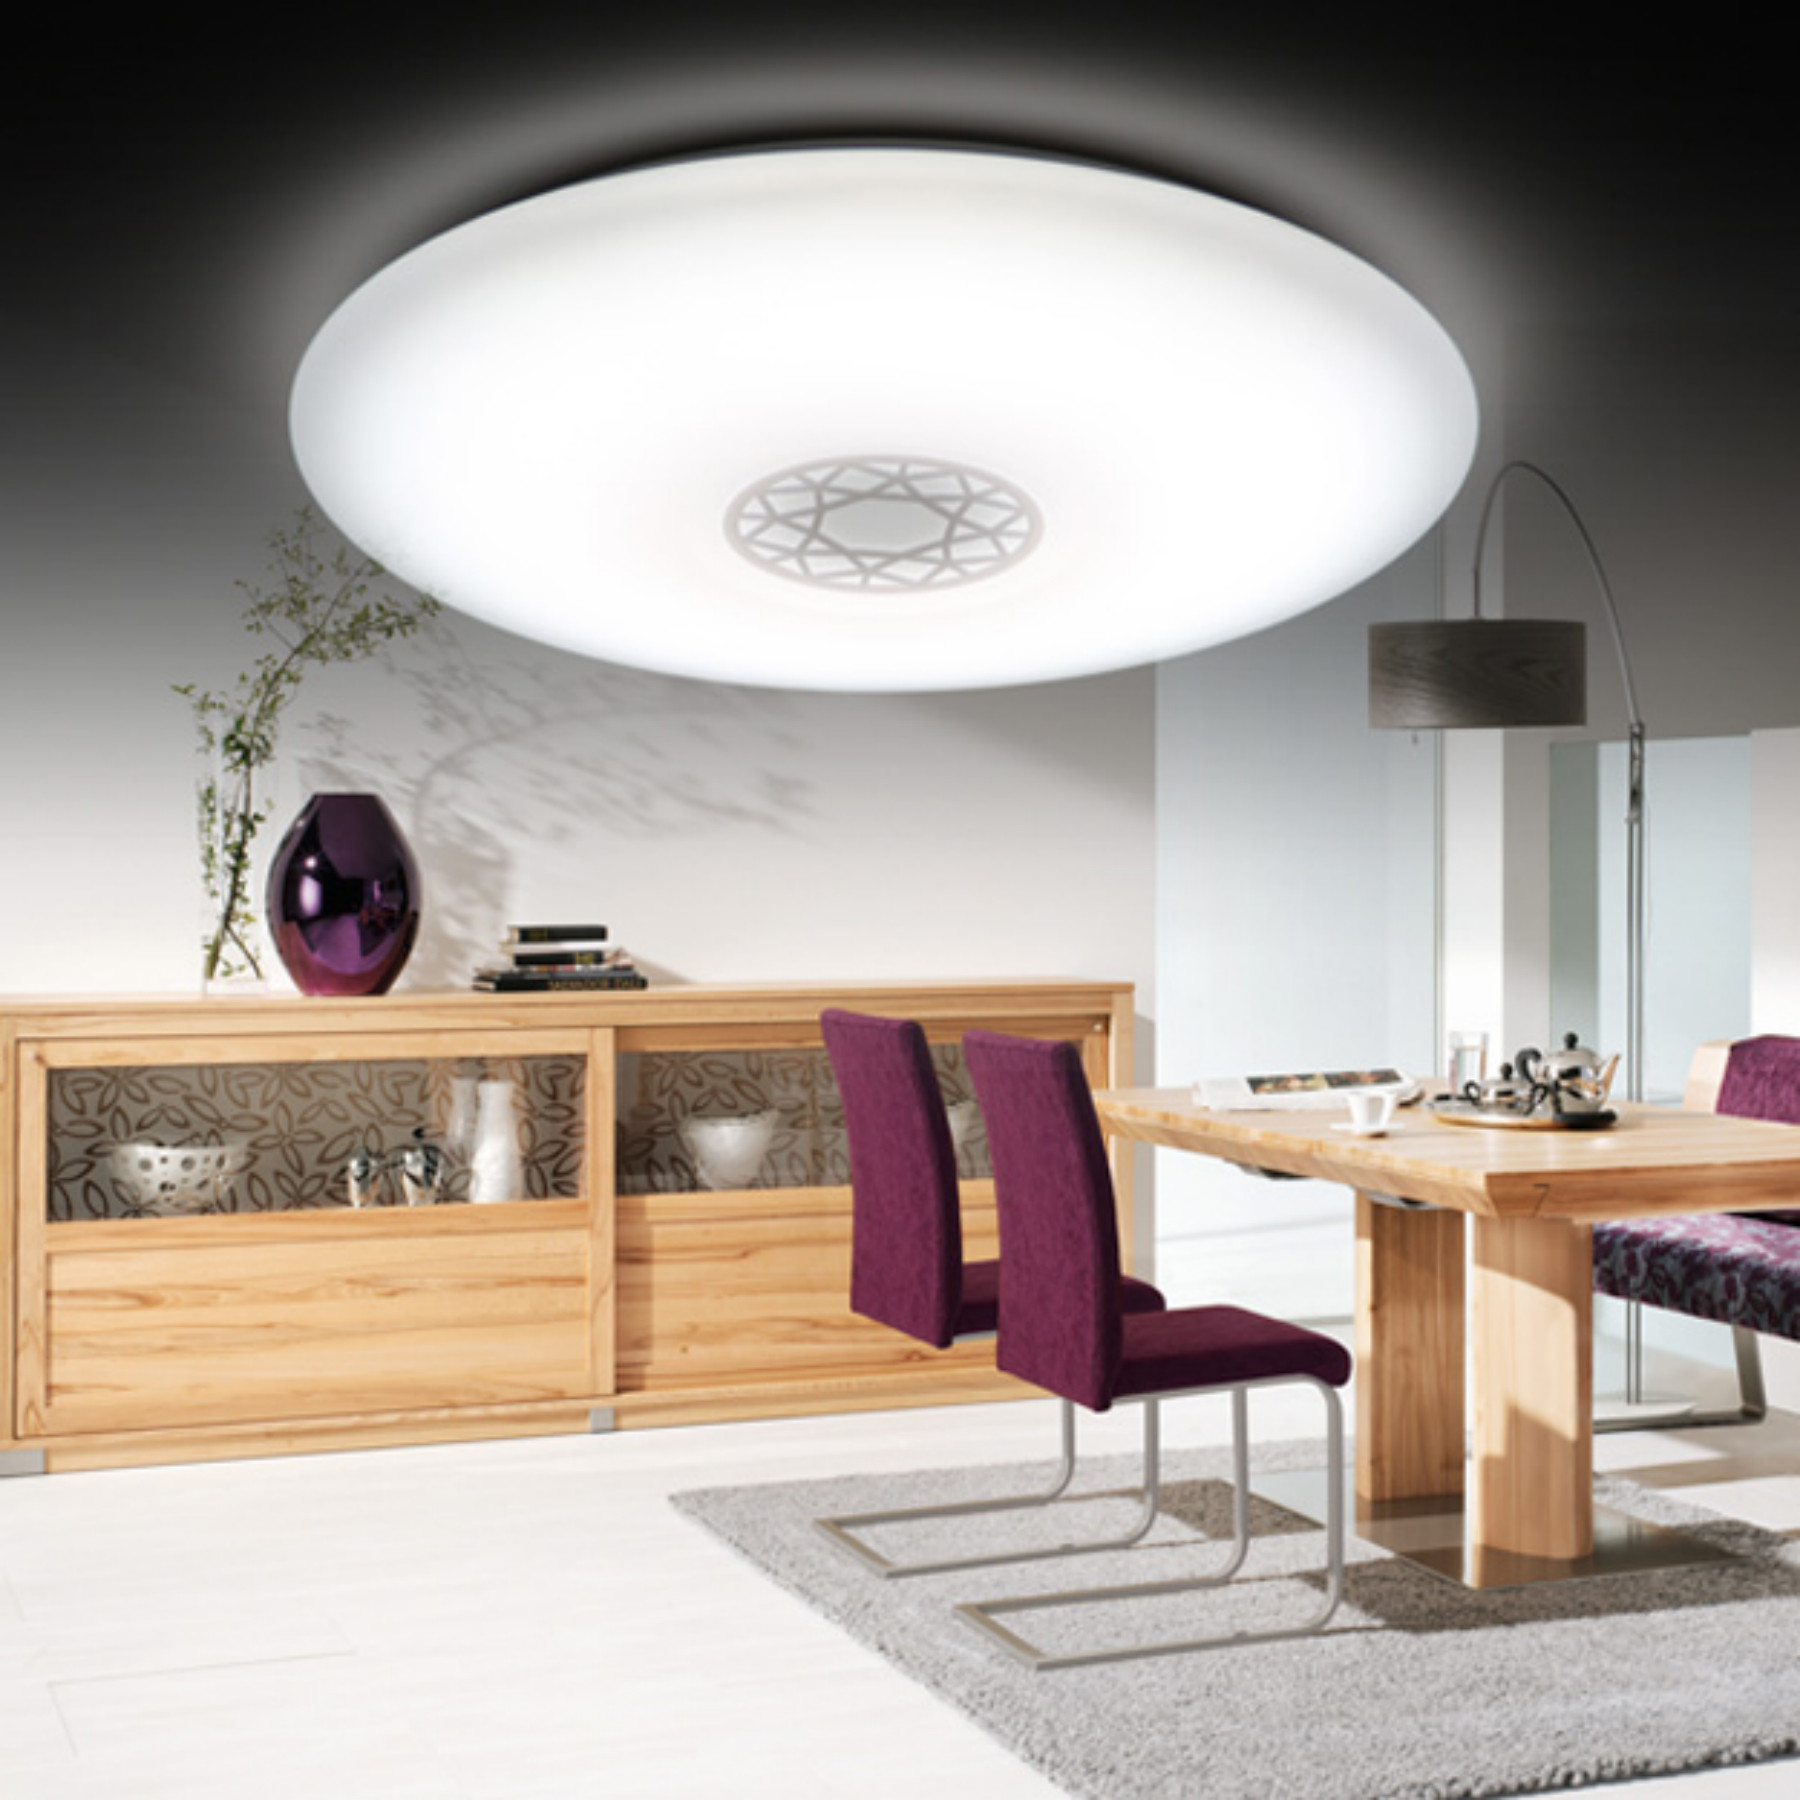 Excellent Luminous Efficiency LED Kitchen Ceiling Lights Smooth And Clean Appearance